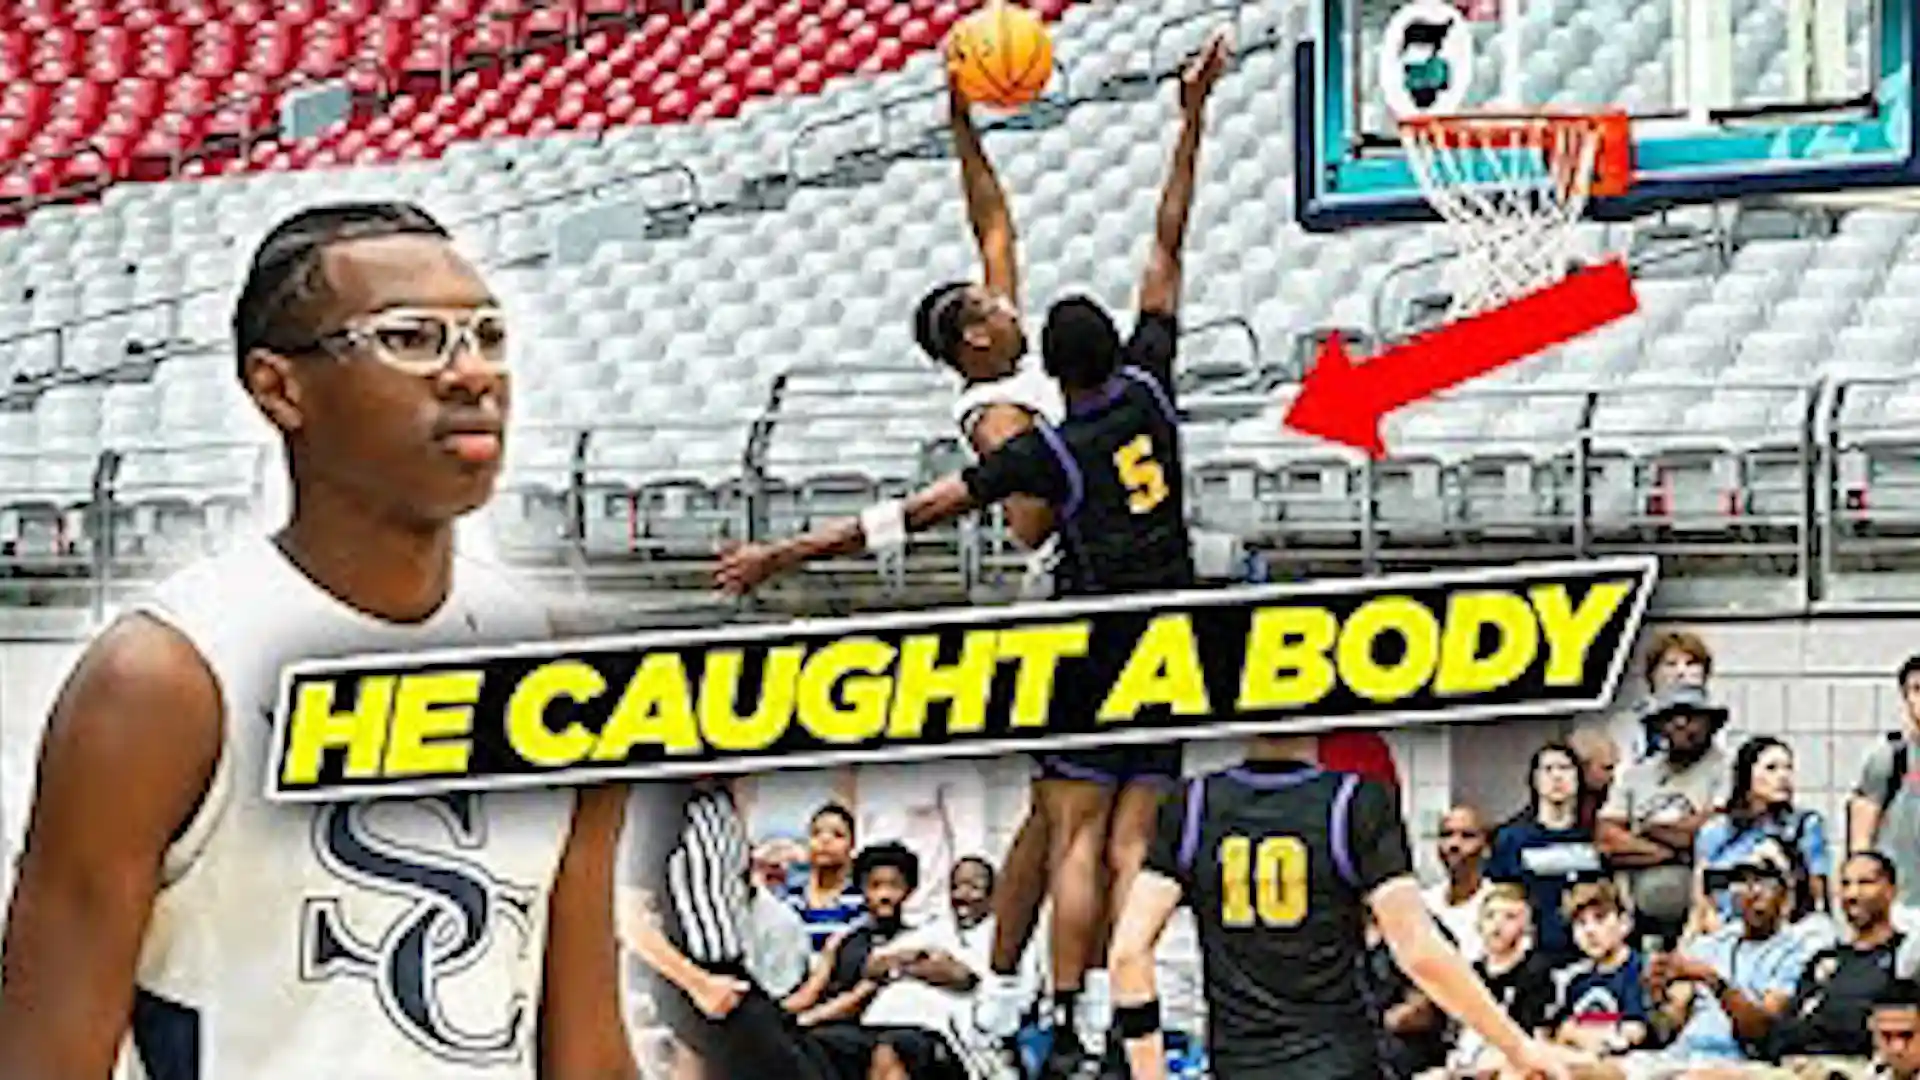 LeBron James DNA On Full Display! | Bryce James Catches BODY